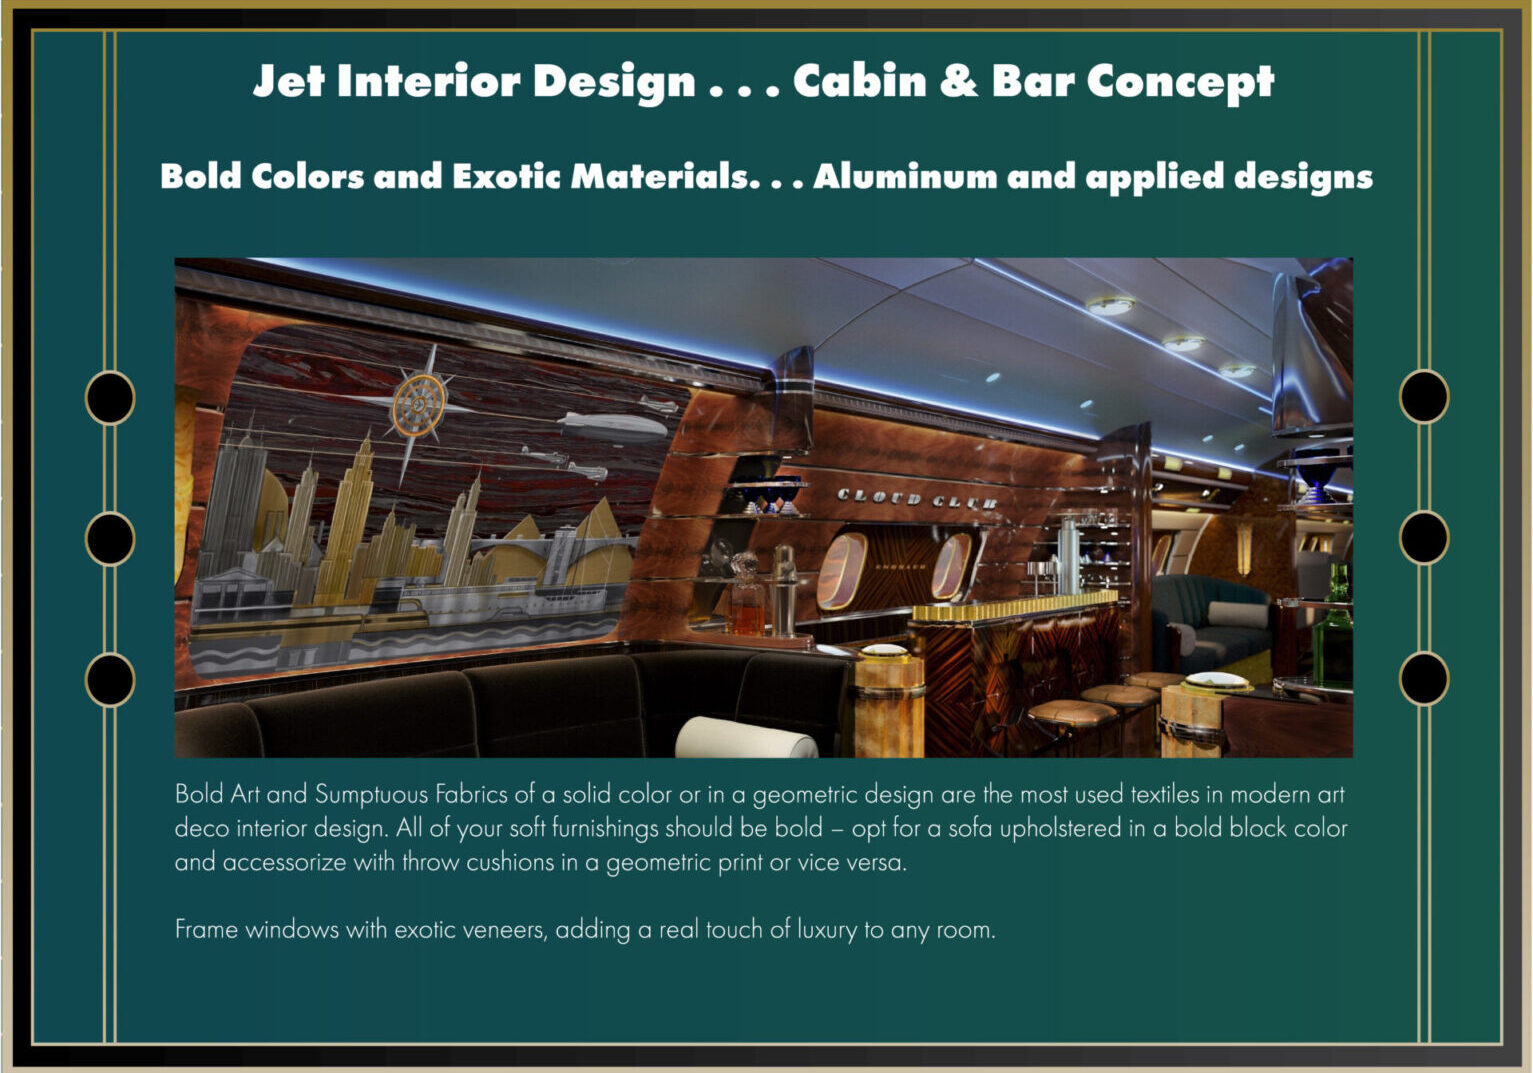 Jet Interior Design with Aluminum and applied designs